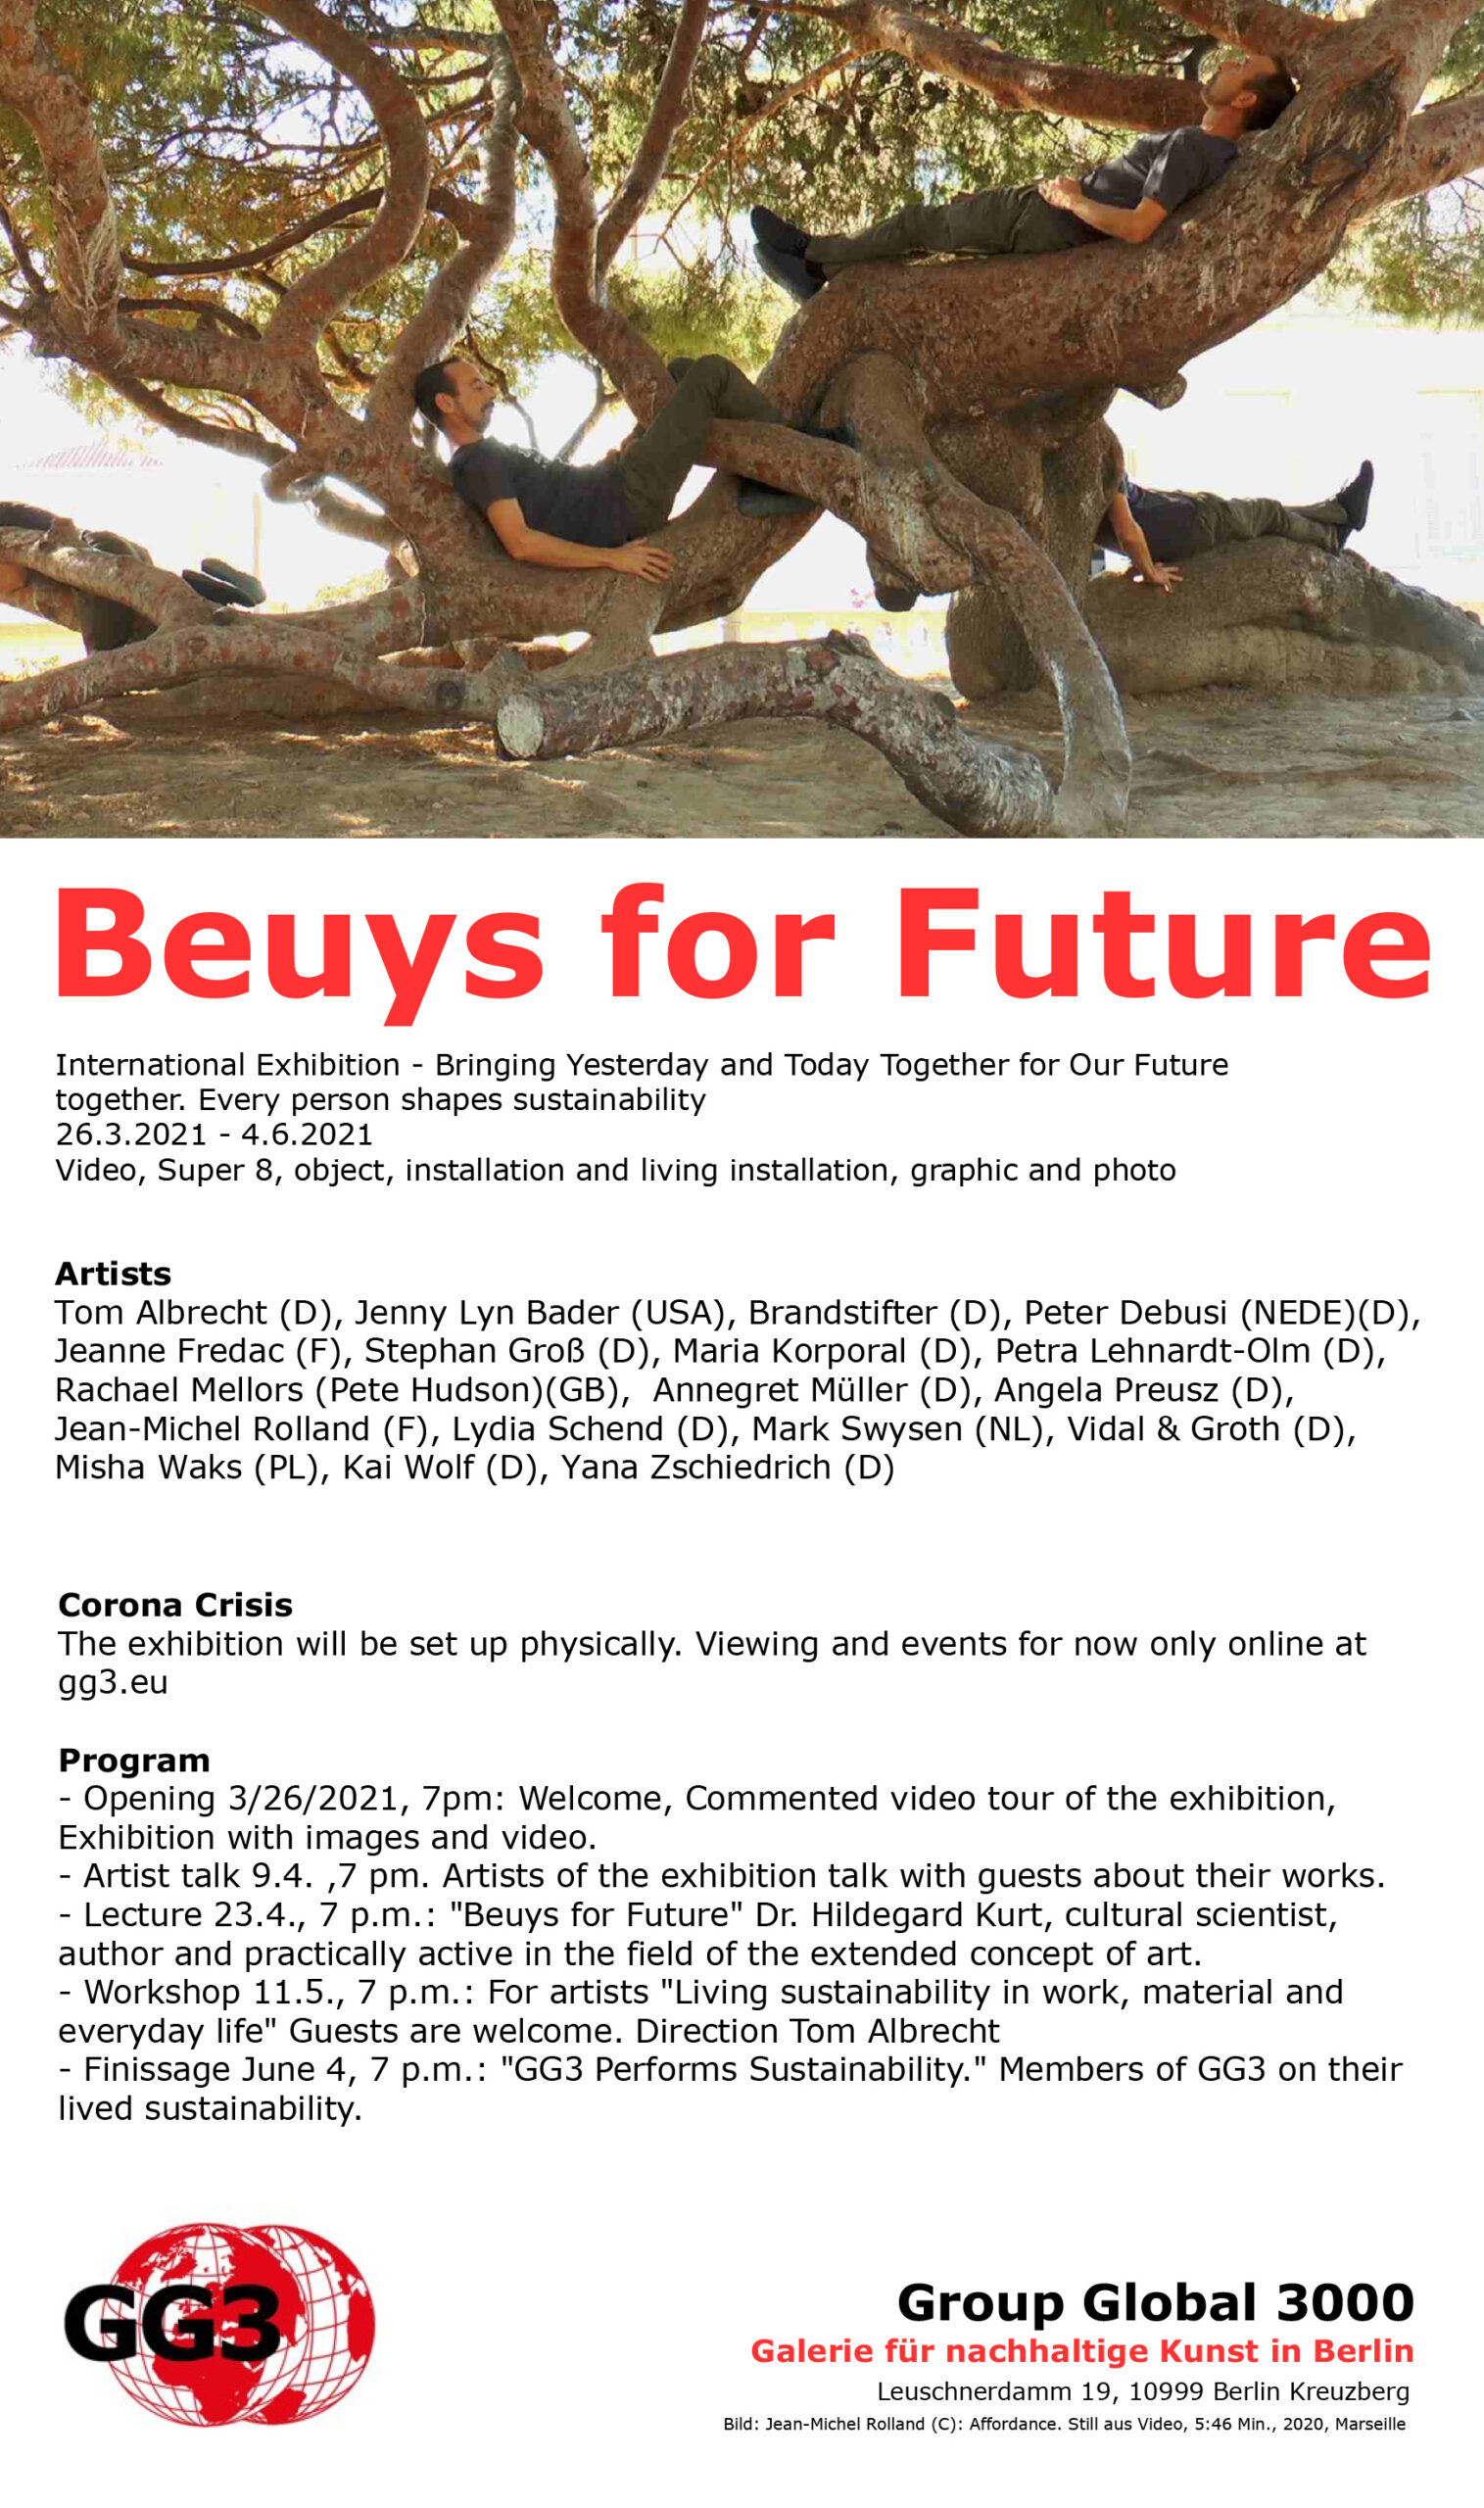 Beuys for Future in GG3